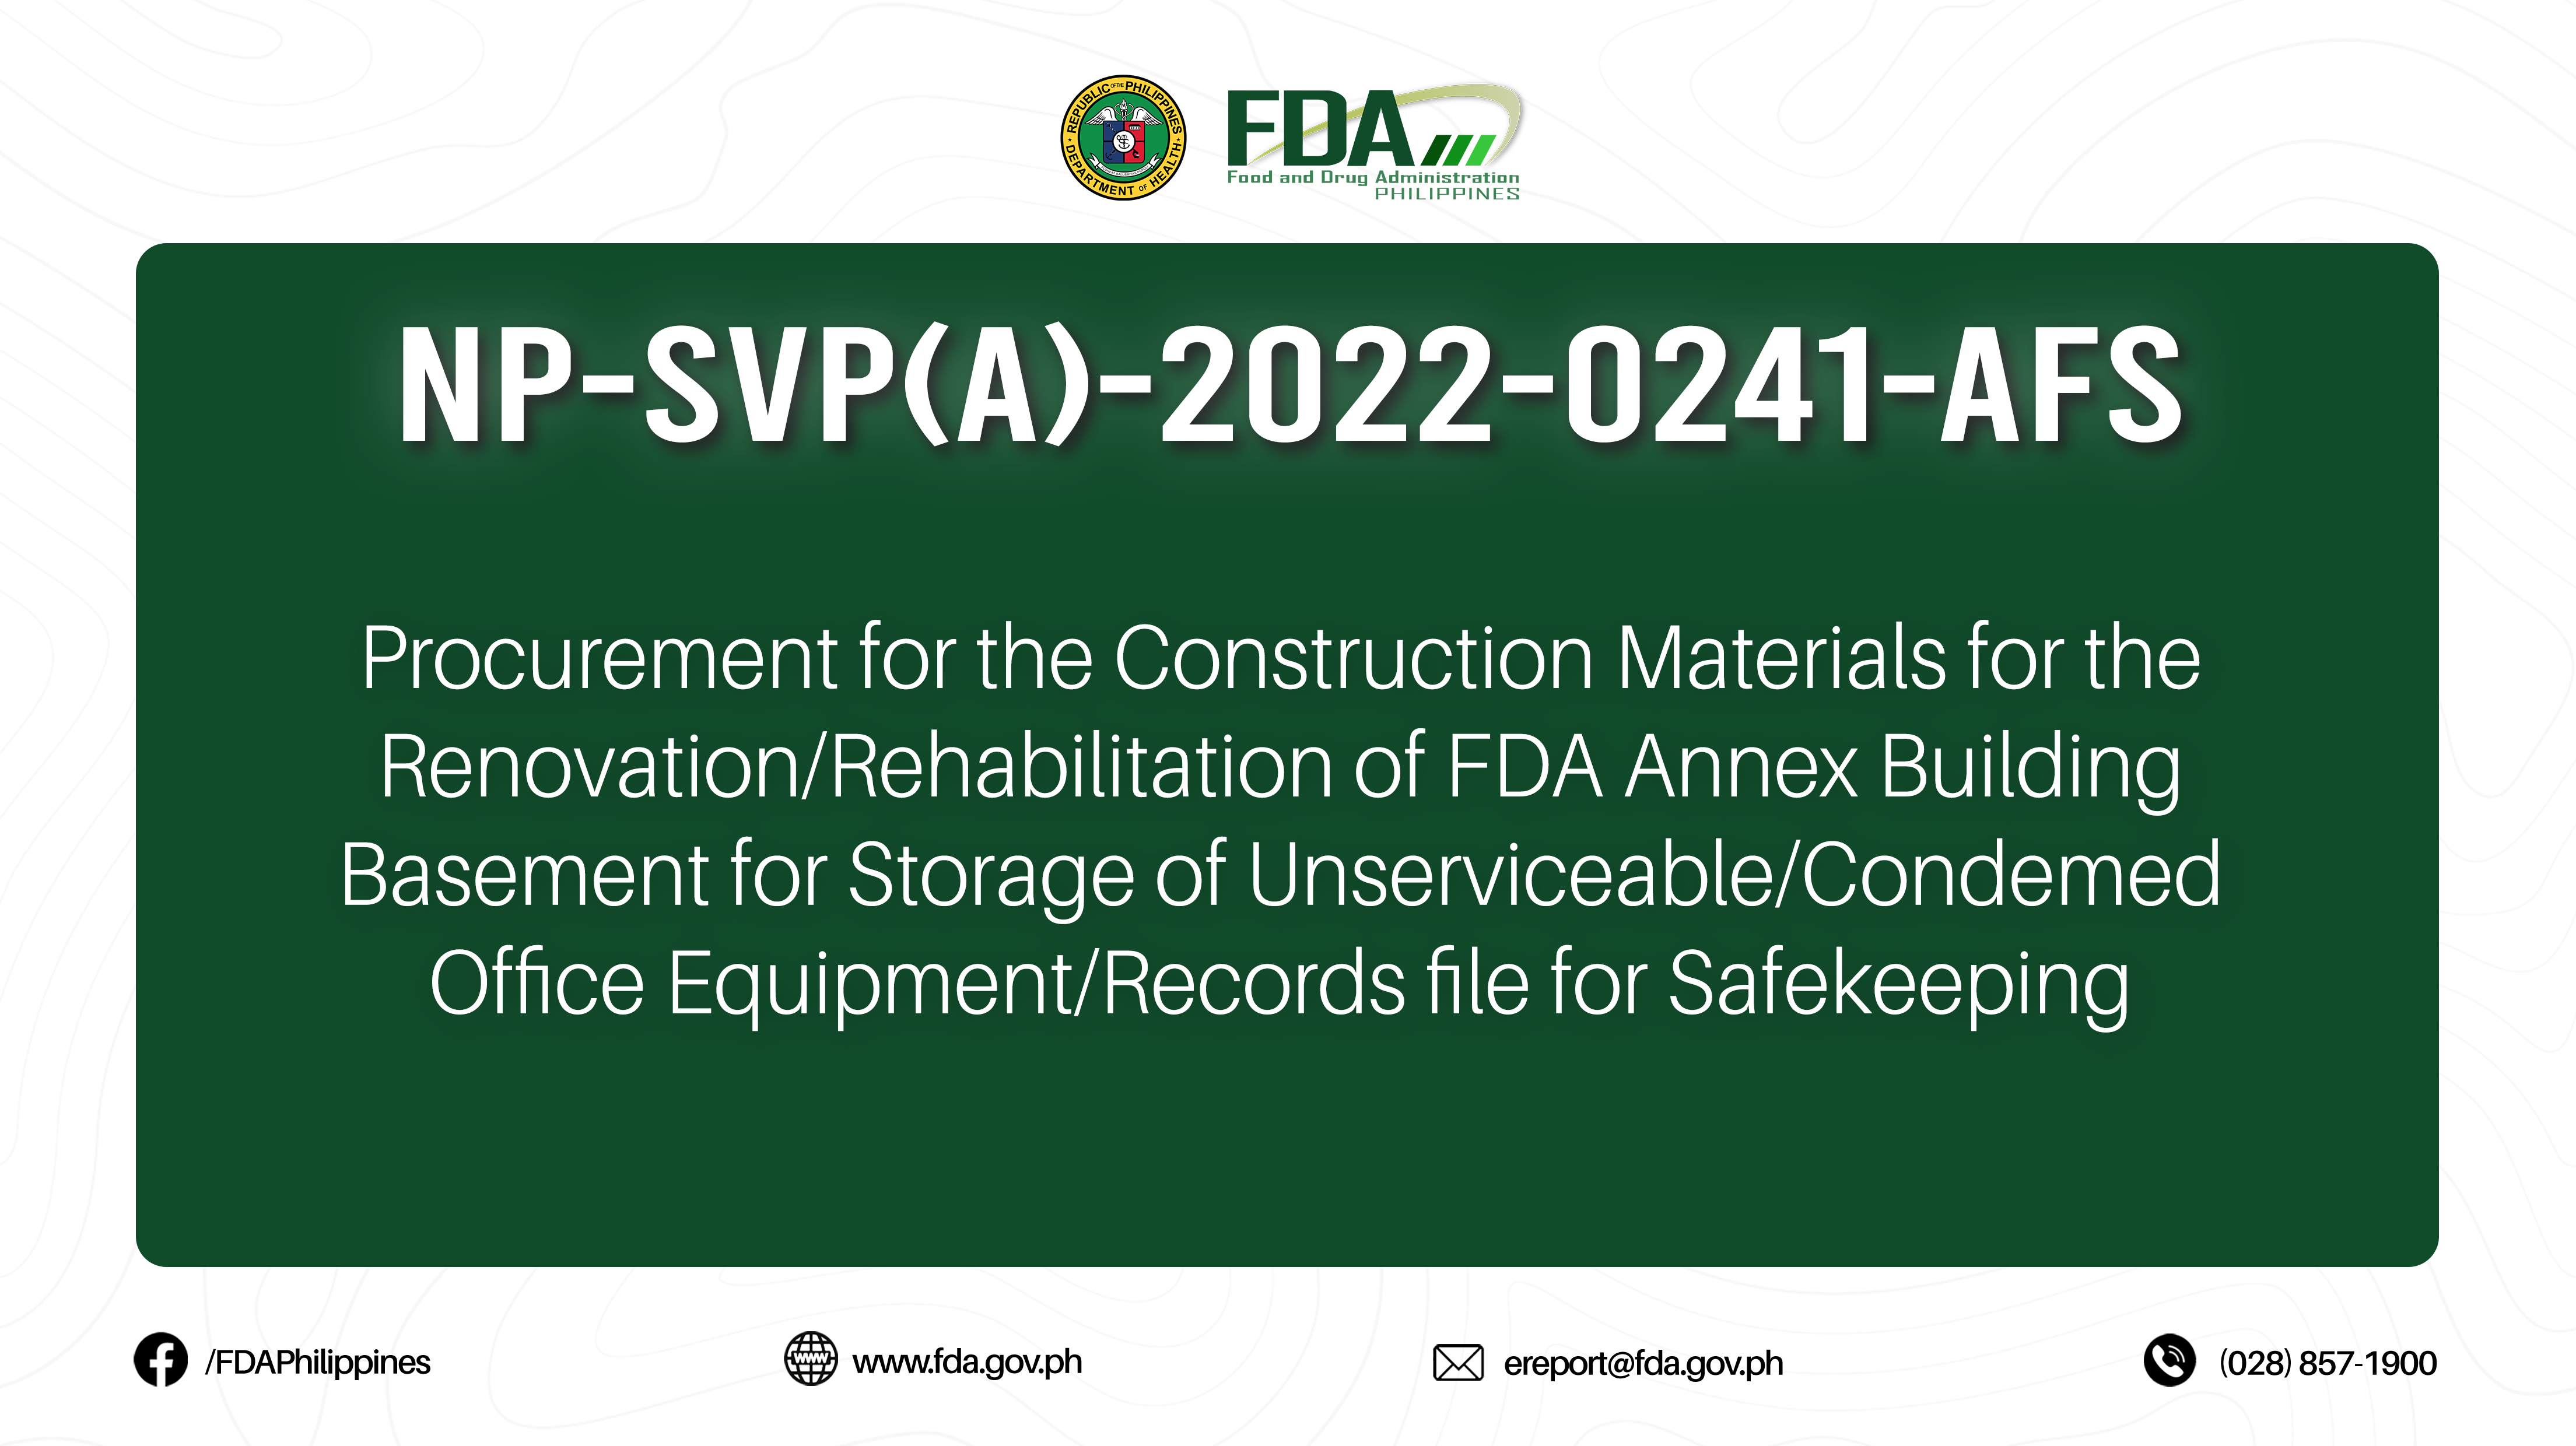 NP-SVP(A)-2022-0241-AFS || Procurement for the Construction Materials for the Renovation/Rehabilitation of FDA Annex Building Basement for Storage of Unserviceable/Condemed Office Equipment/Records file for Safekeeping